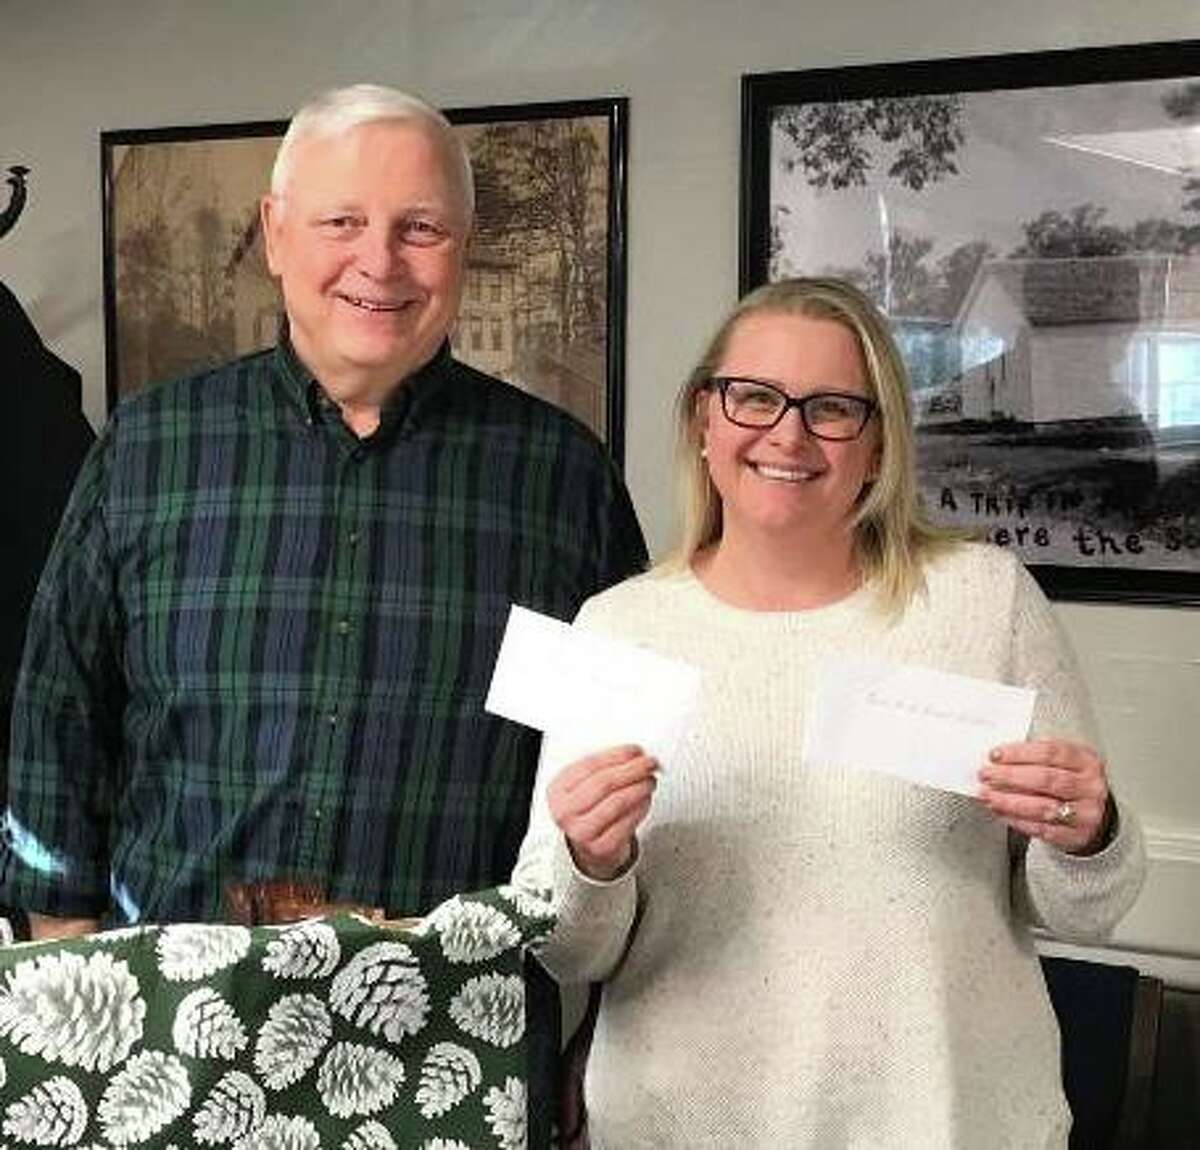 Tashua Knolls Senior Men's Club President Frank Chudy presents two $500 checks to Michele Jakab, the Trumbull Senior Center Director. The checks to Trumbull Senior Center and the Social Center were in addition to $420 presented earlier to the Center from the TKSMC members as part of its annual Holiday contributions.